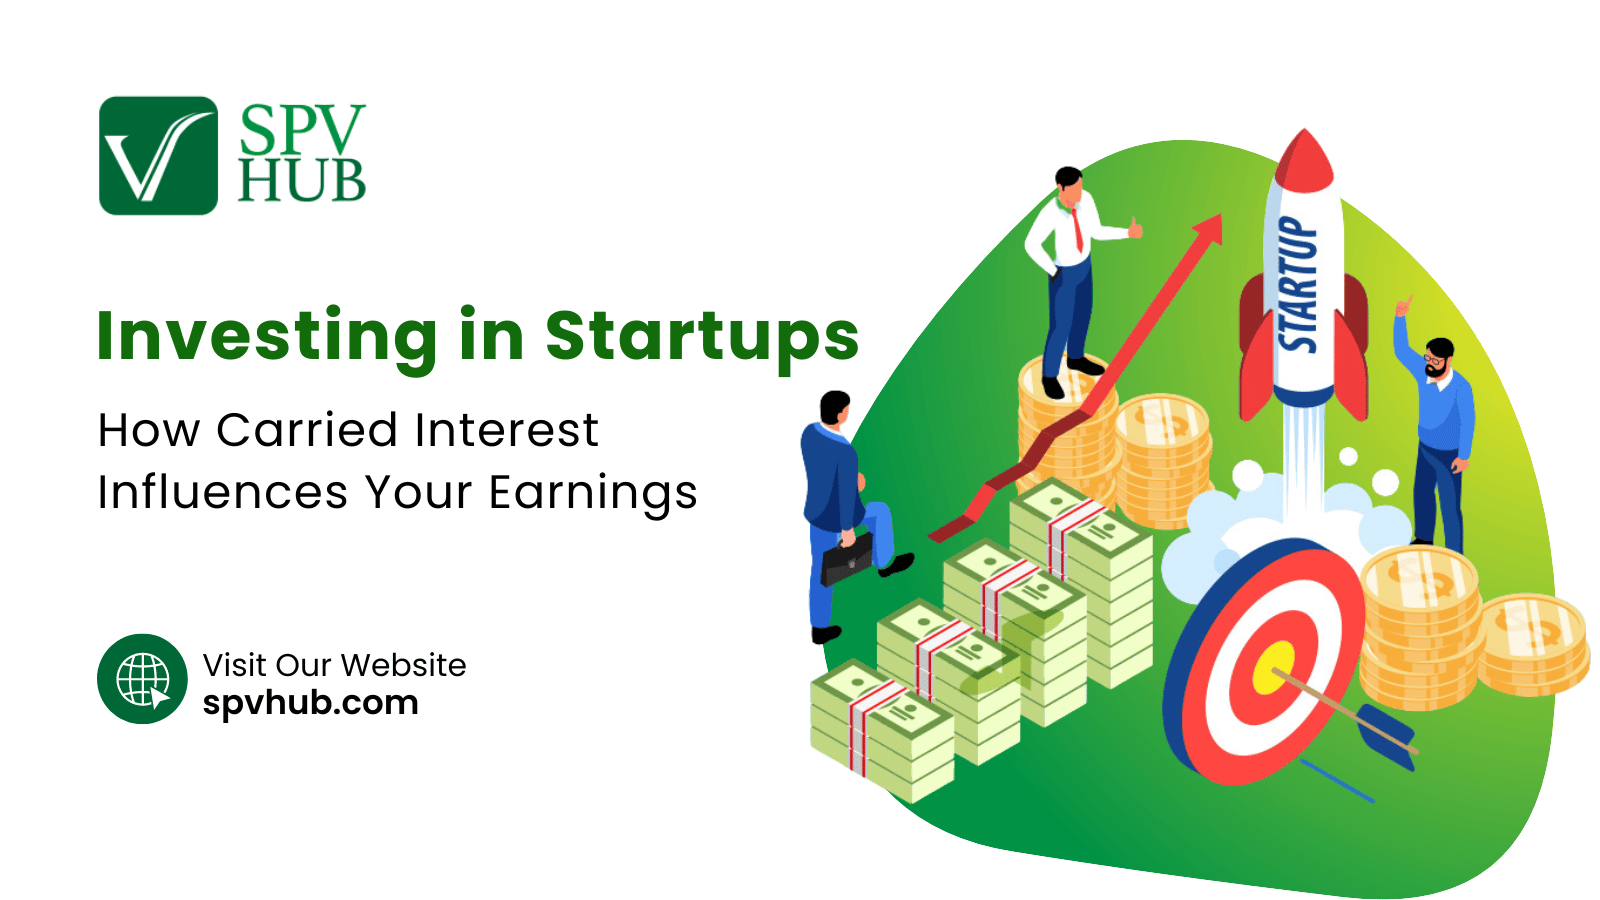 Investing in Startups: How Carried Interest Influences Your Earnings